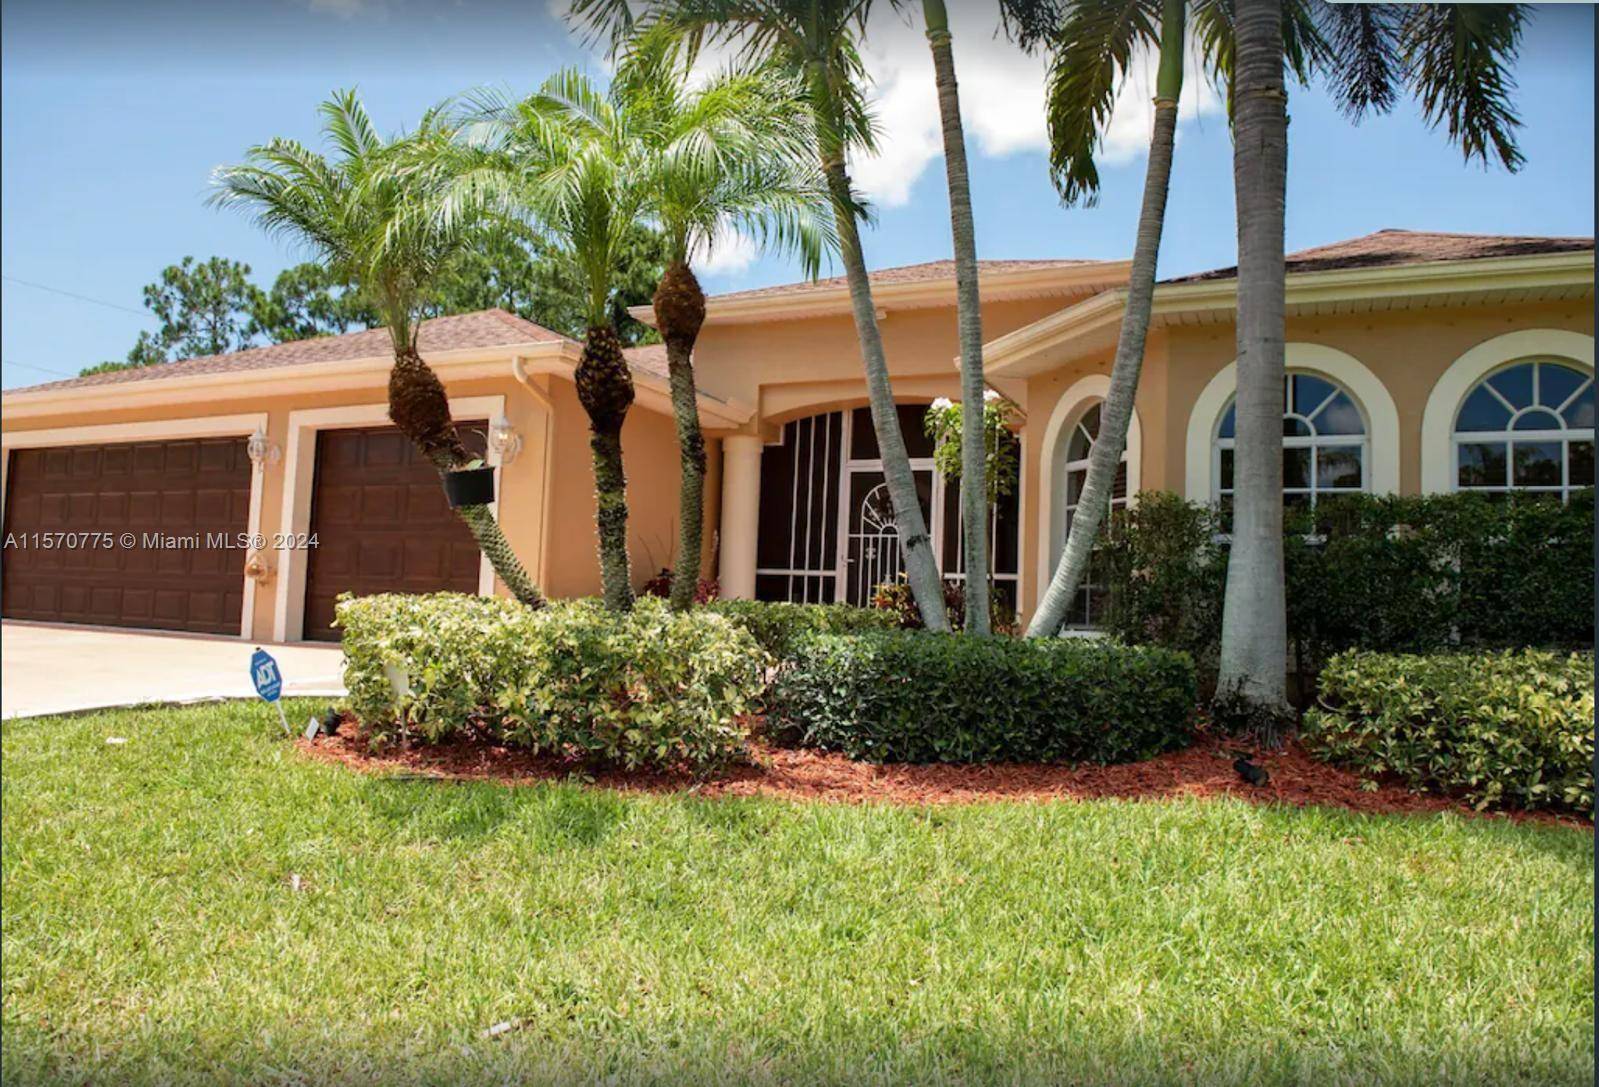 MATICULOUSLY FURNISHED 4 BEDROOMS, 3 FULL BATHROOMS AND 3 CAR GARAGE IN BEAUTIFUL AREA OF PORT SAINT LUCIE.